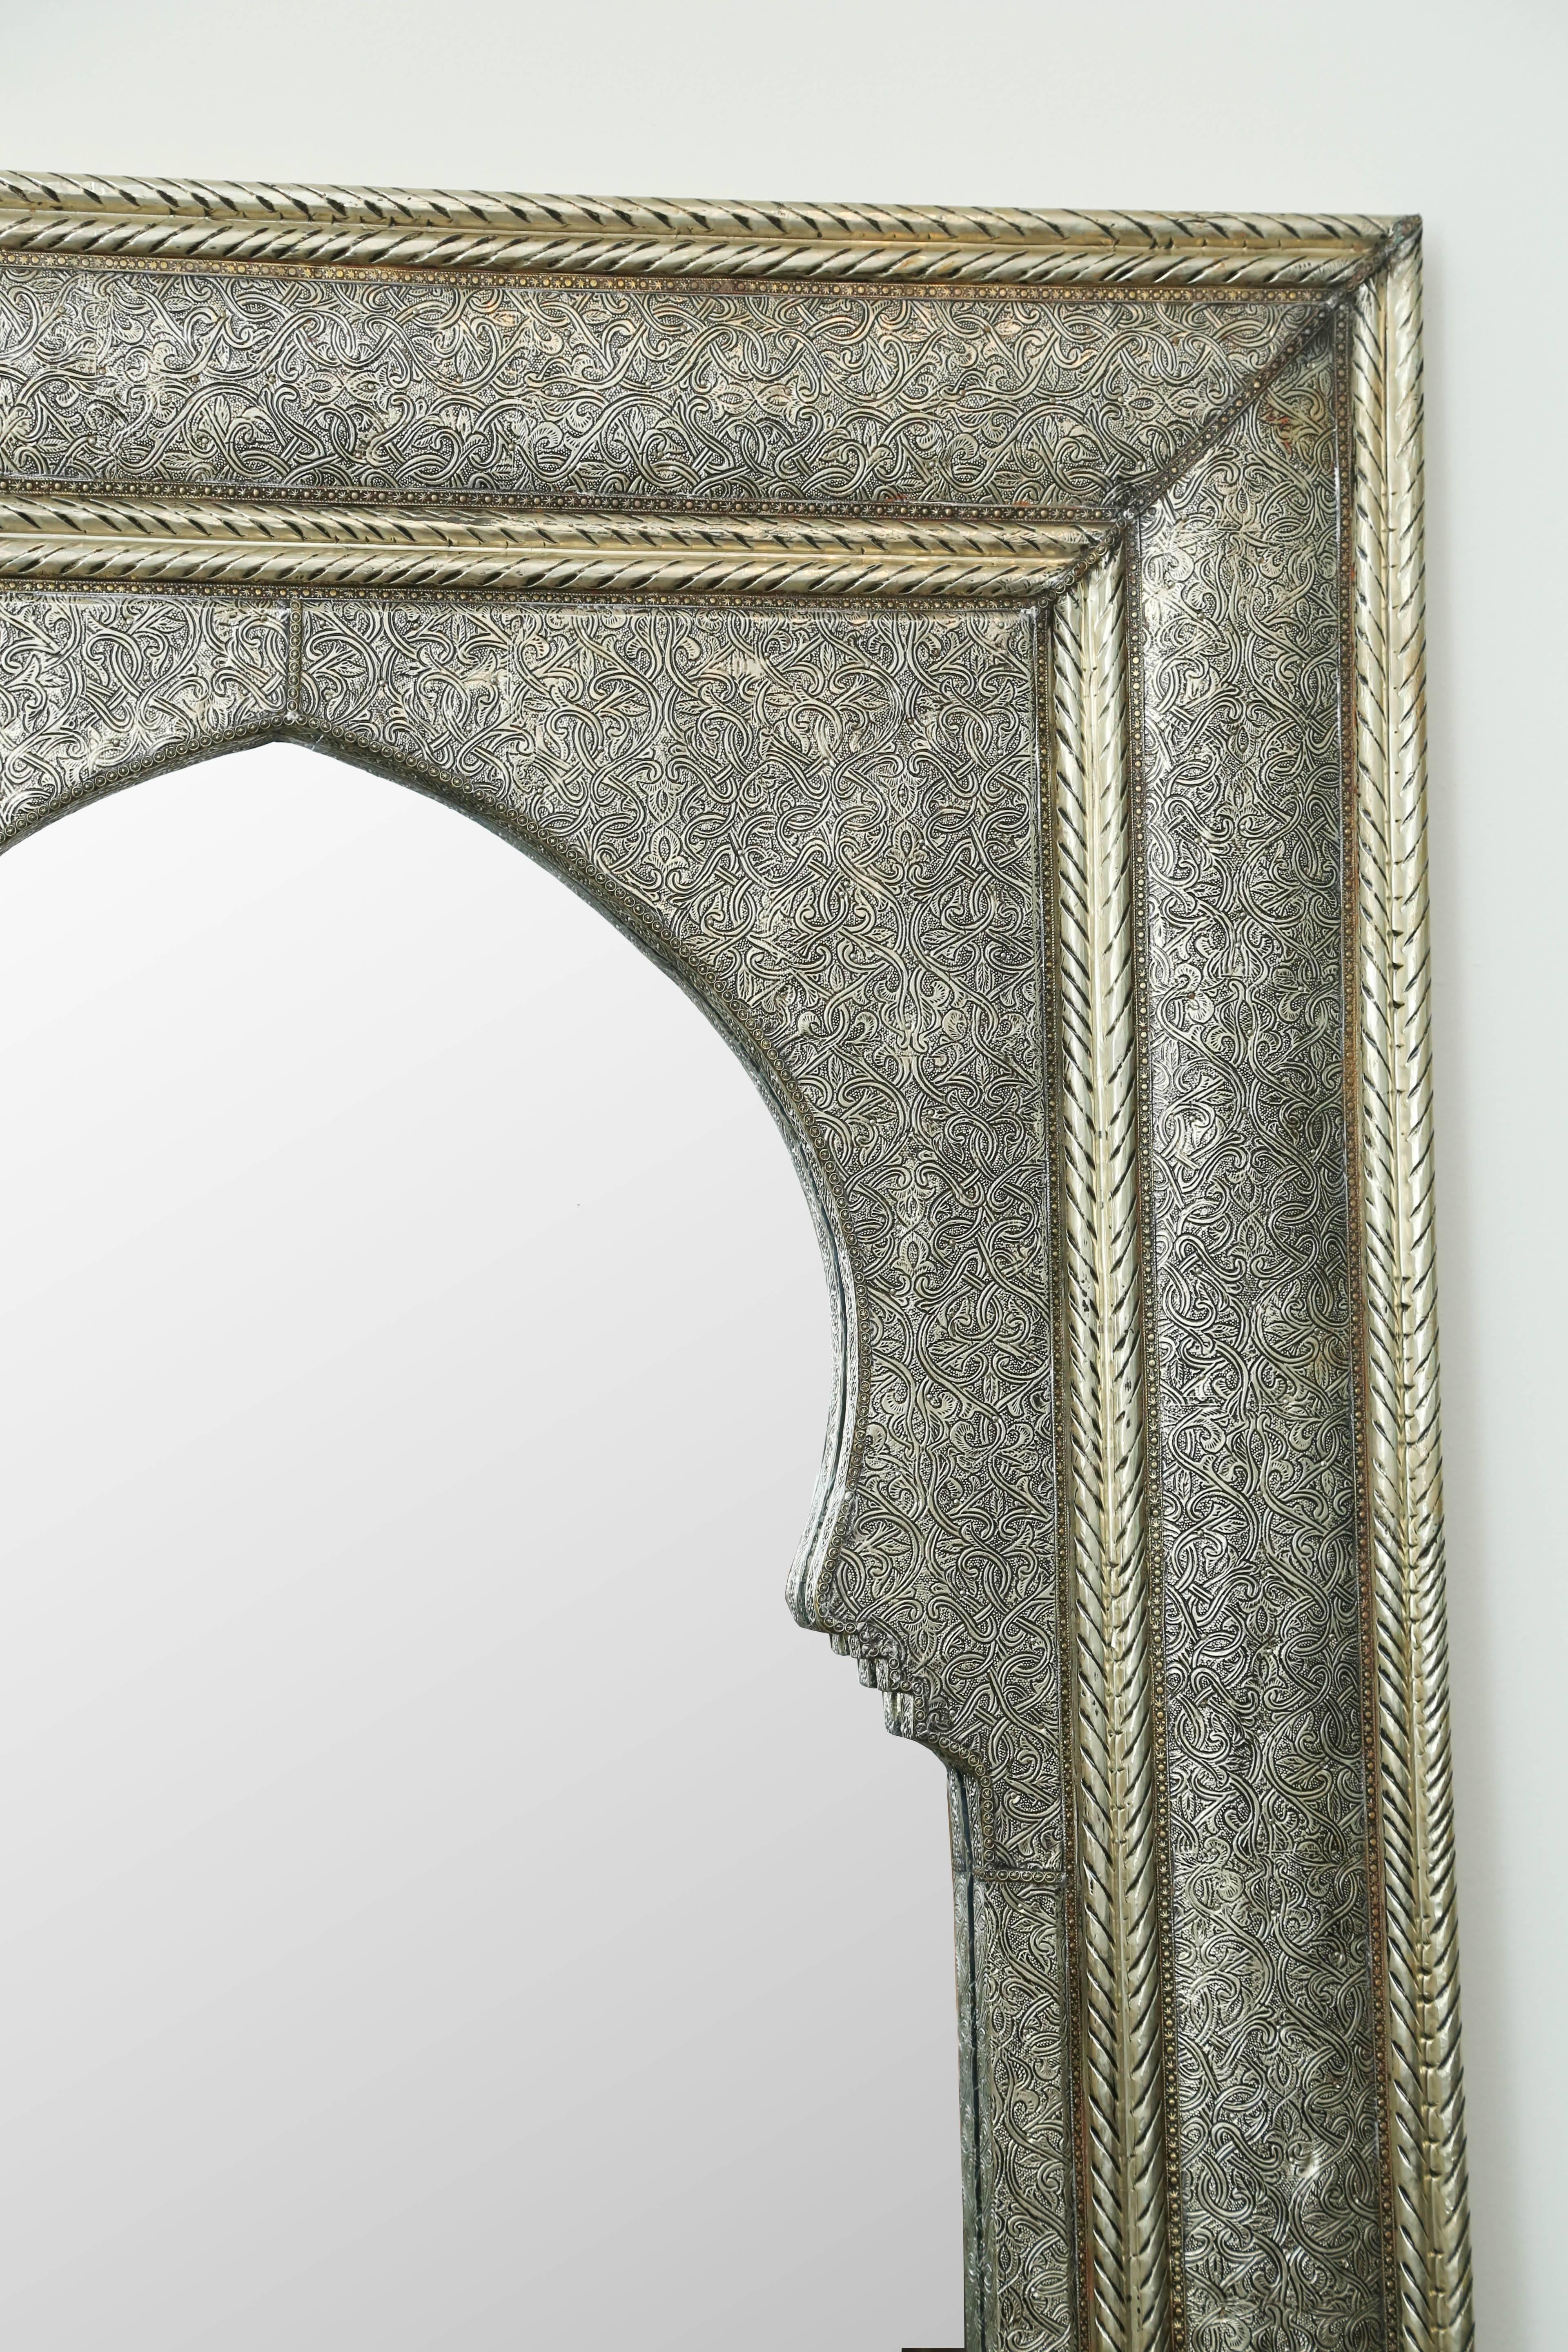 This matching pair of floor length mirrors feature the Classic Moroccan key hole arch shape. The sturdy wood frame is overlaid with hand tooled and meticulously carved metal.
Handcrafted and imported from Morocco.
       